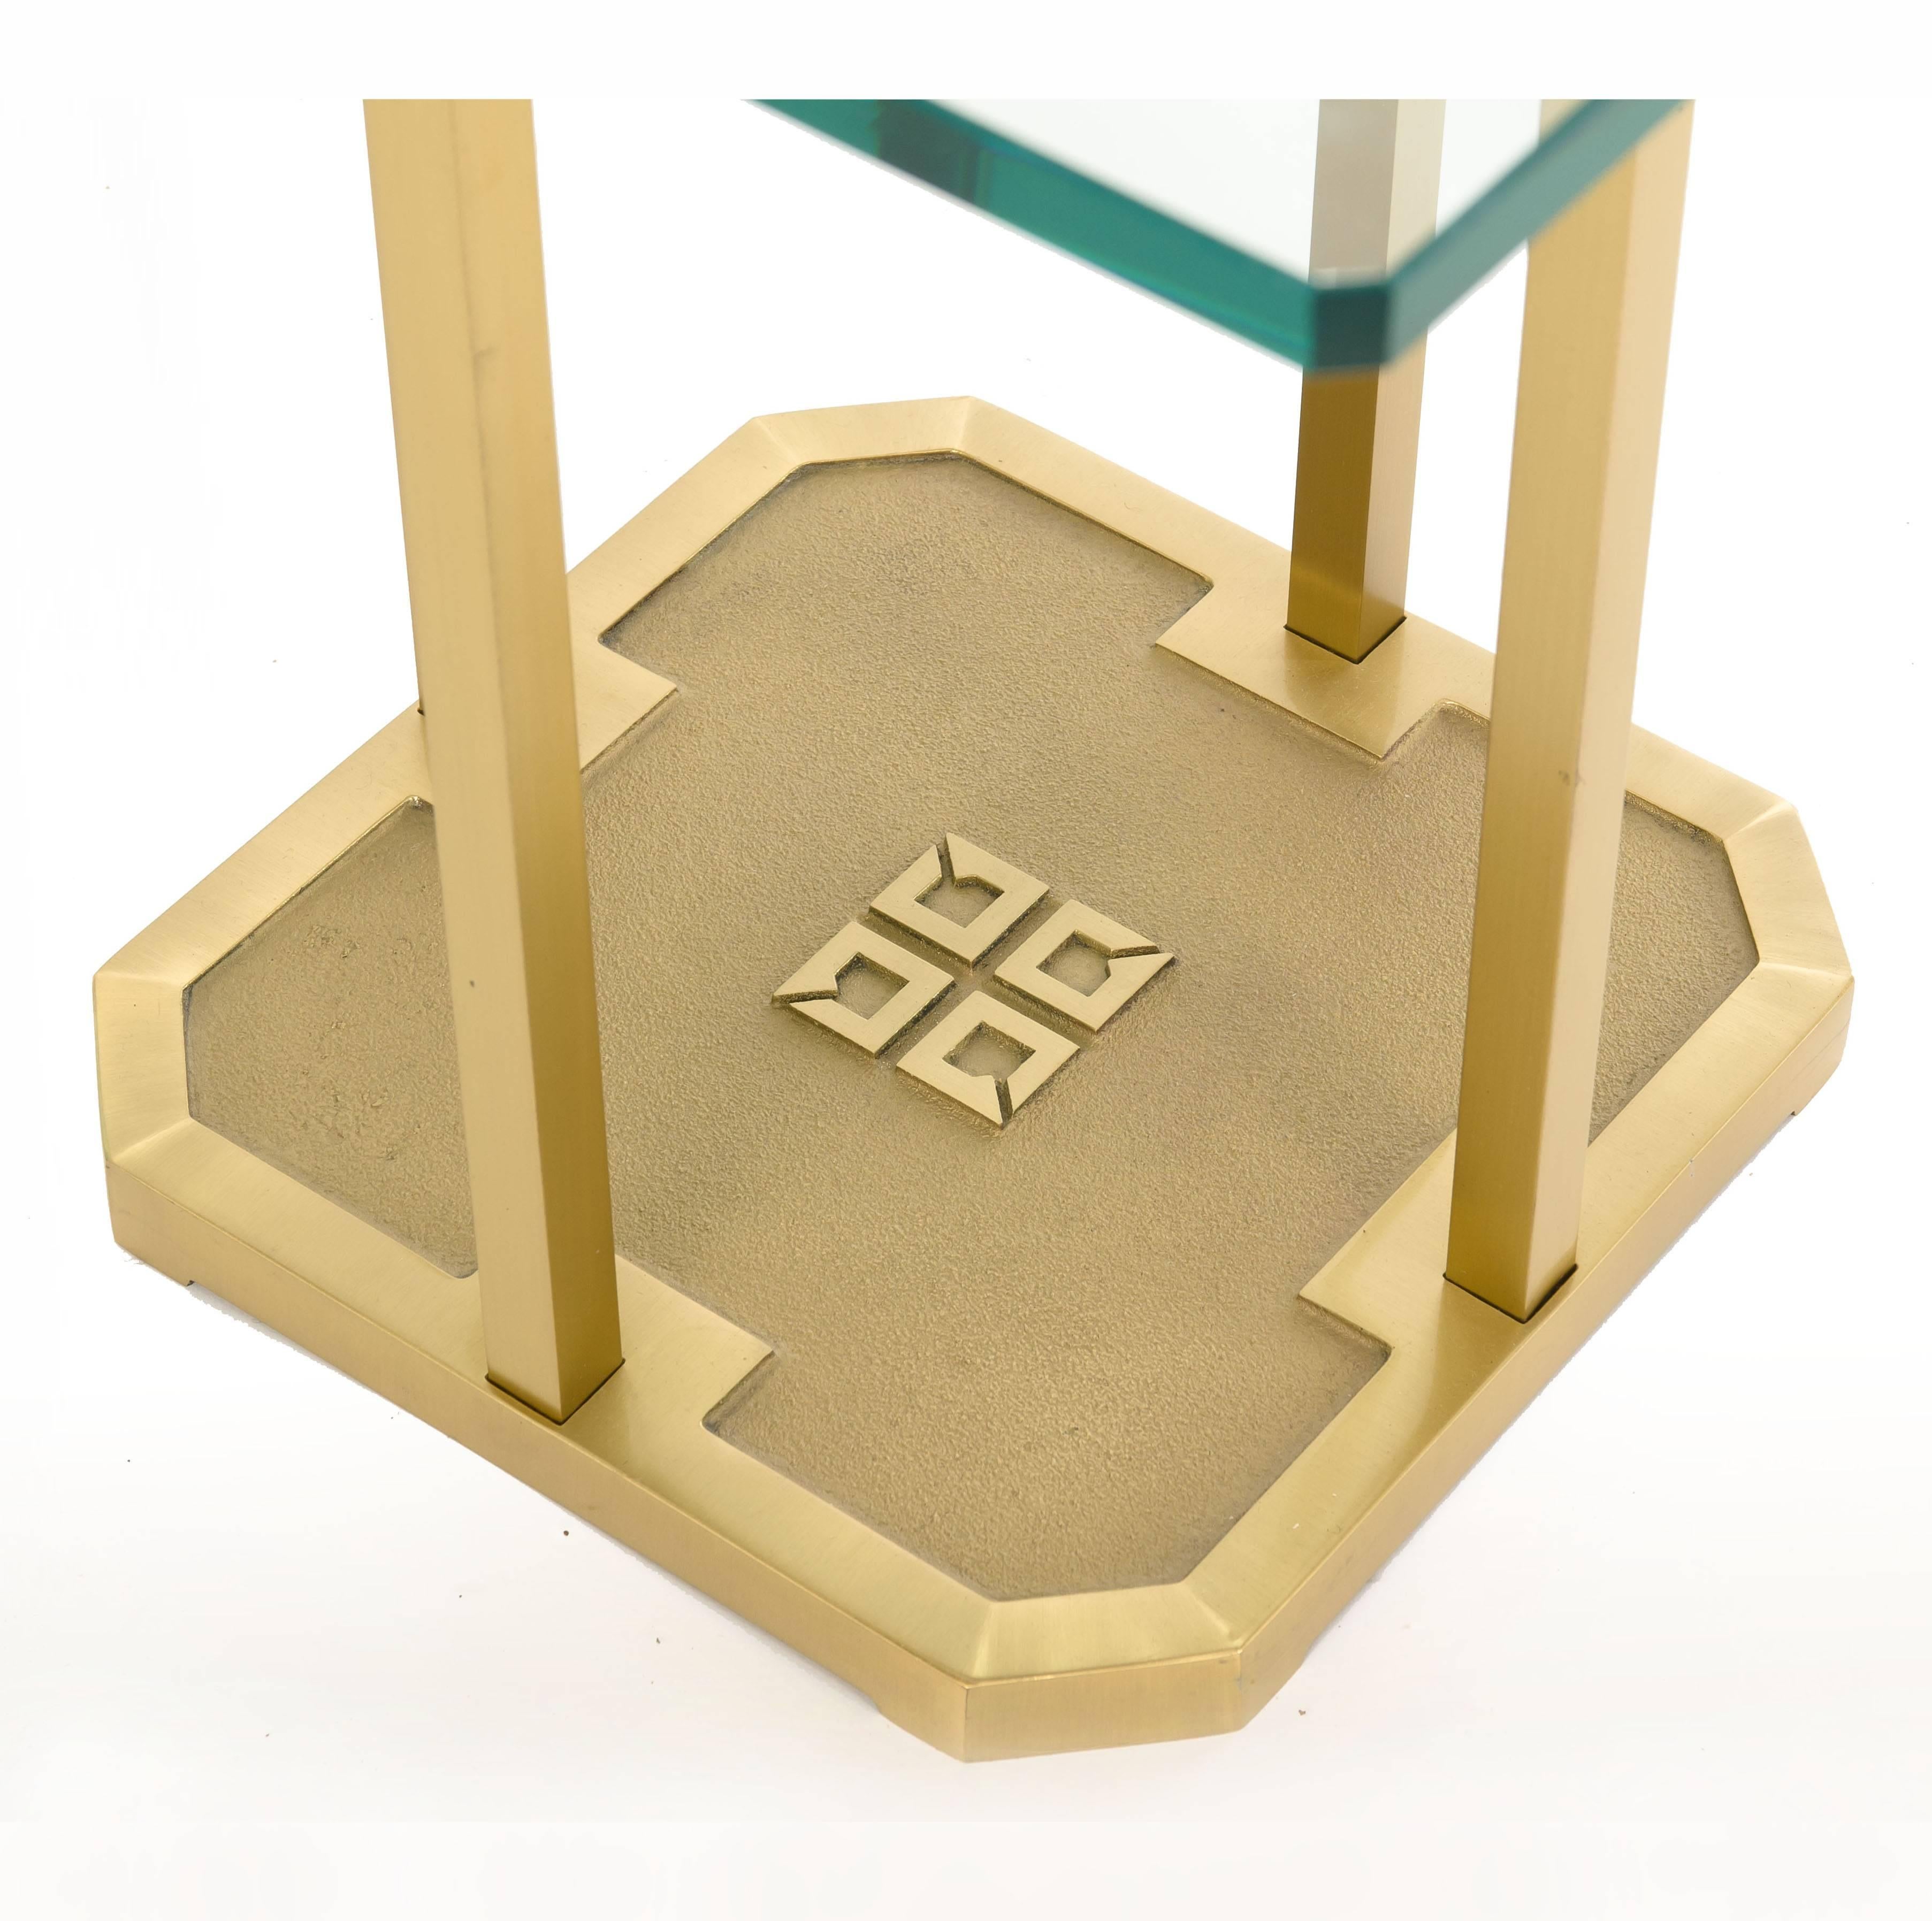 This lovely brass and glass side table is designed by Peter Ghyczy in the early 1970s in the Netherlands. Born in Budapest, Peter Ghyczy started his career as an architect in Germany. He has been living in the Netherlands for many years and this is